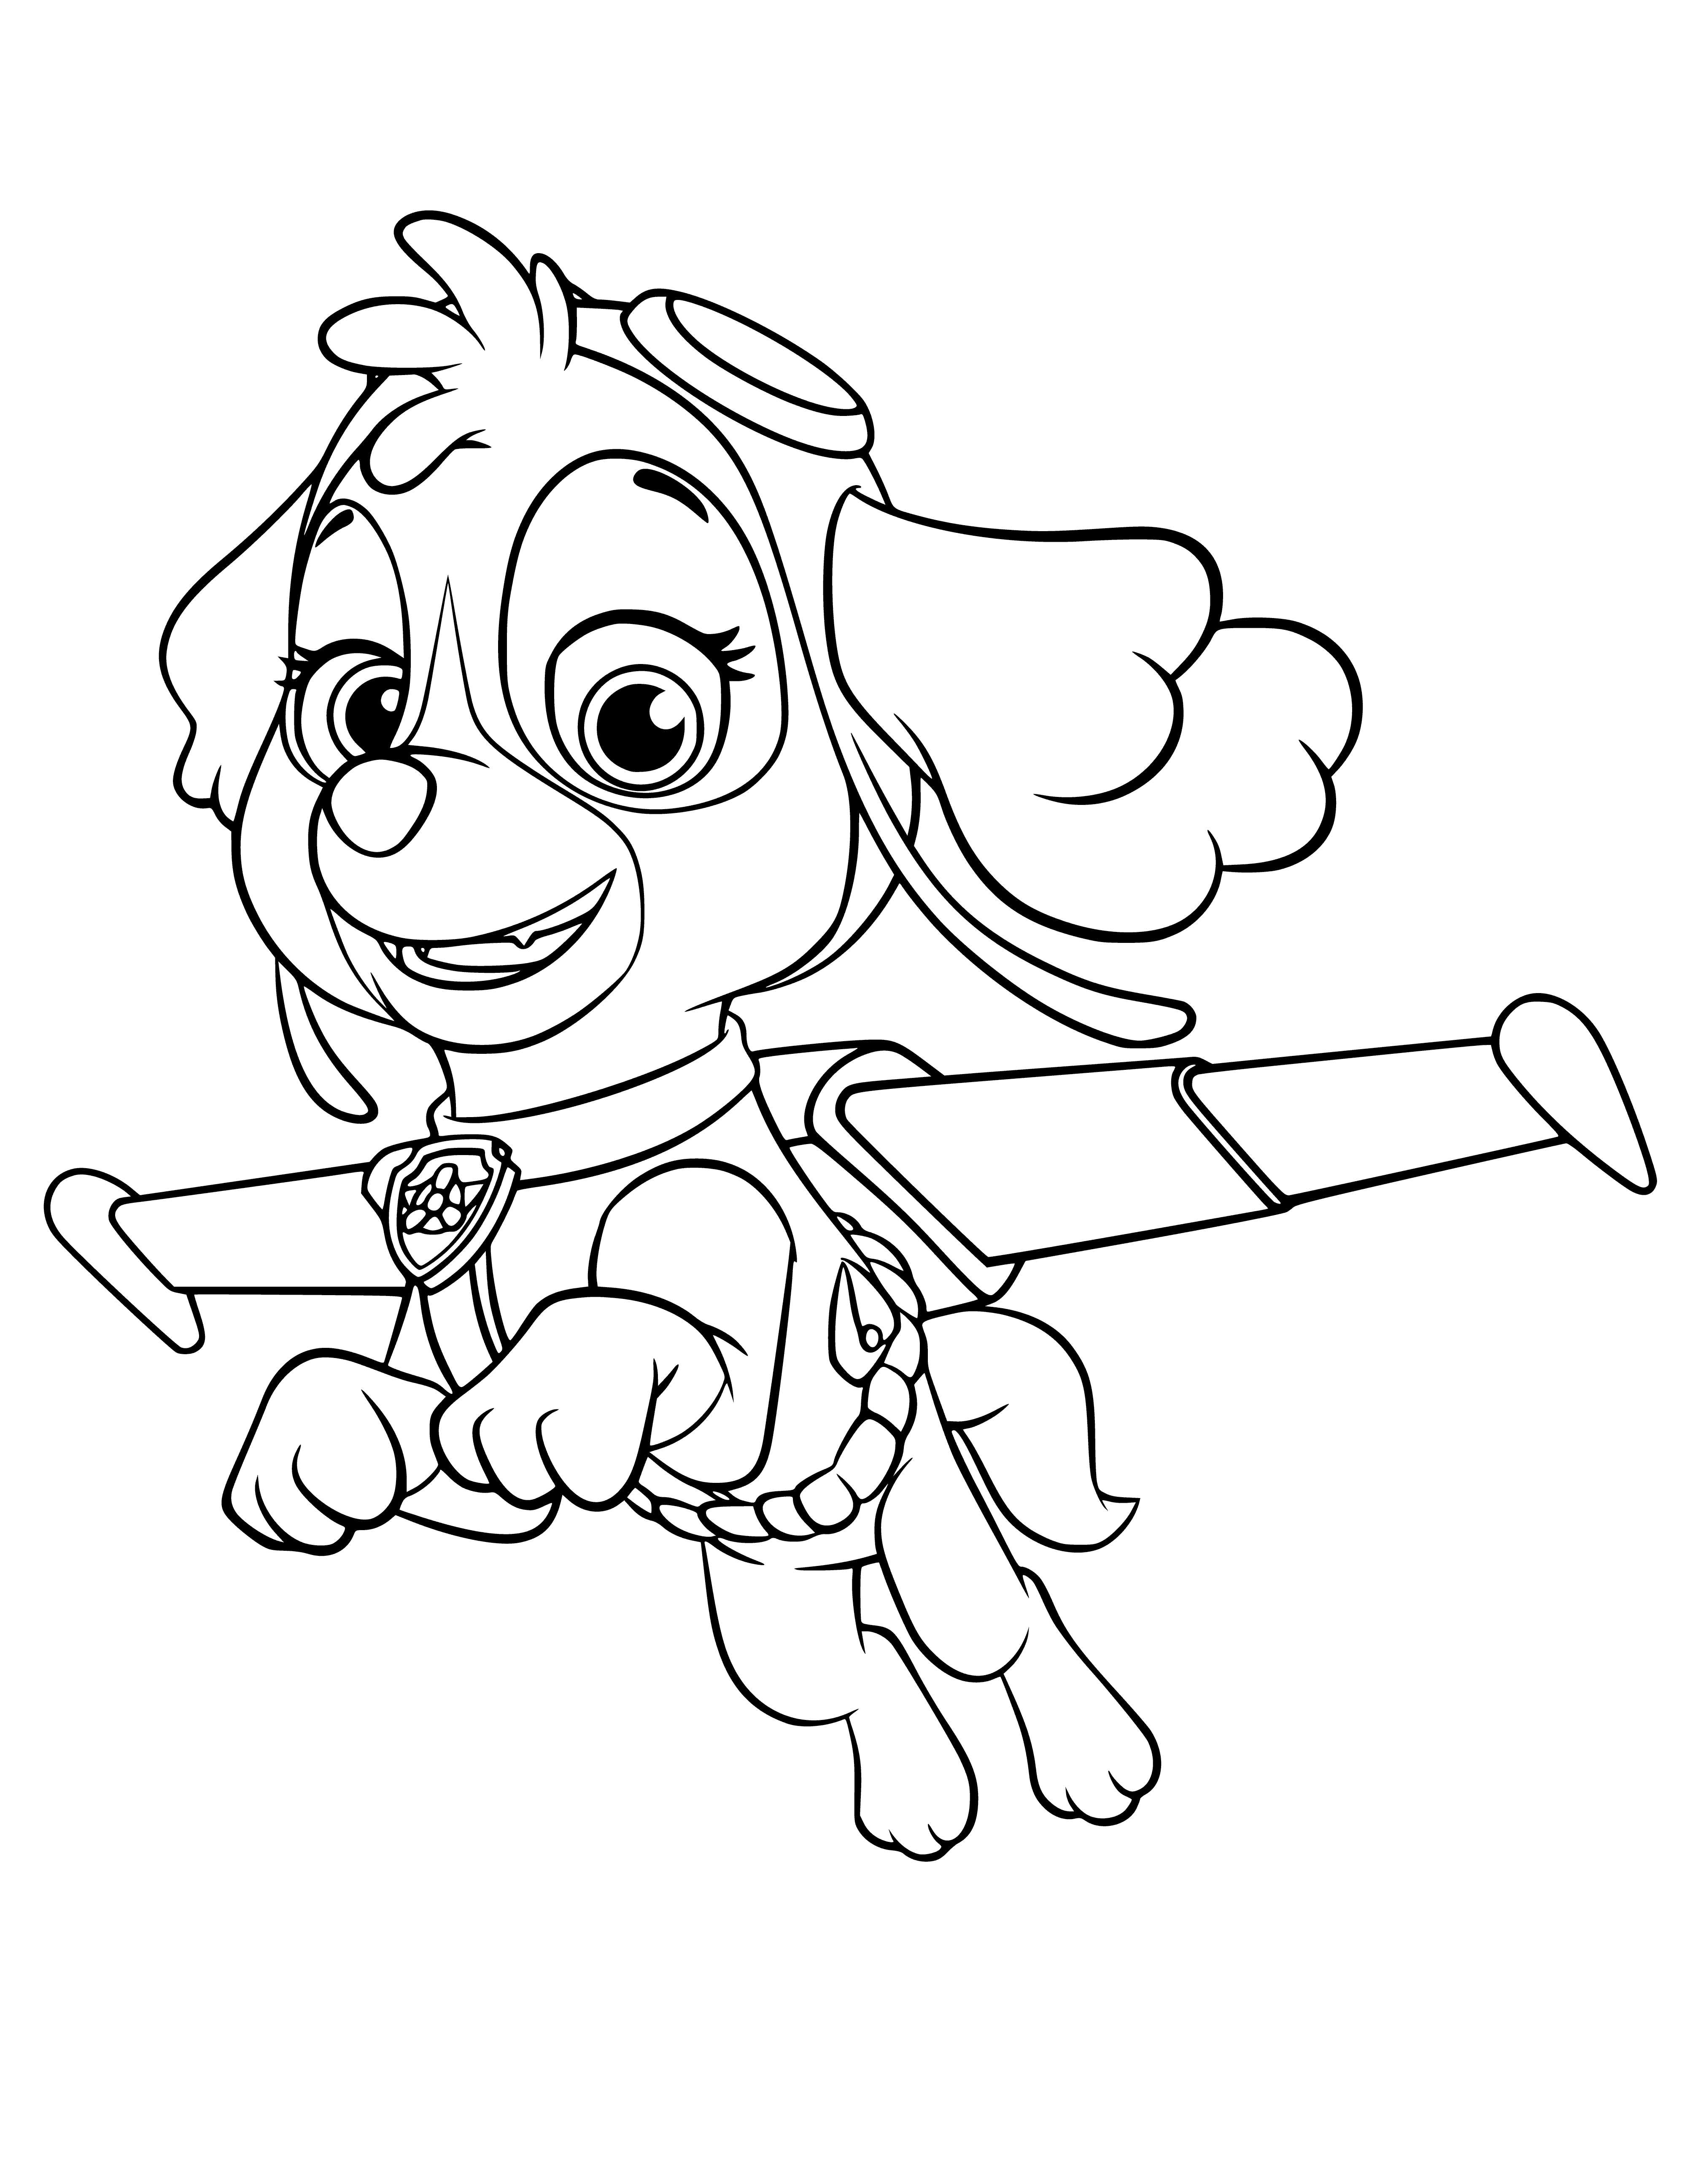 Skye coloring page